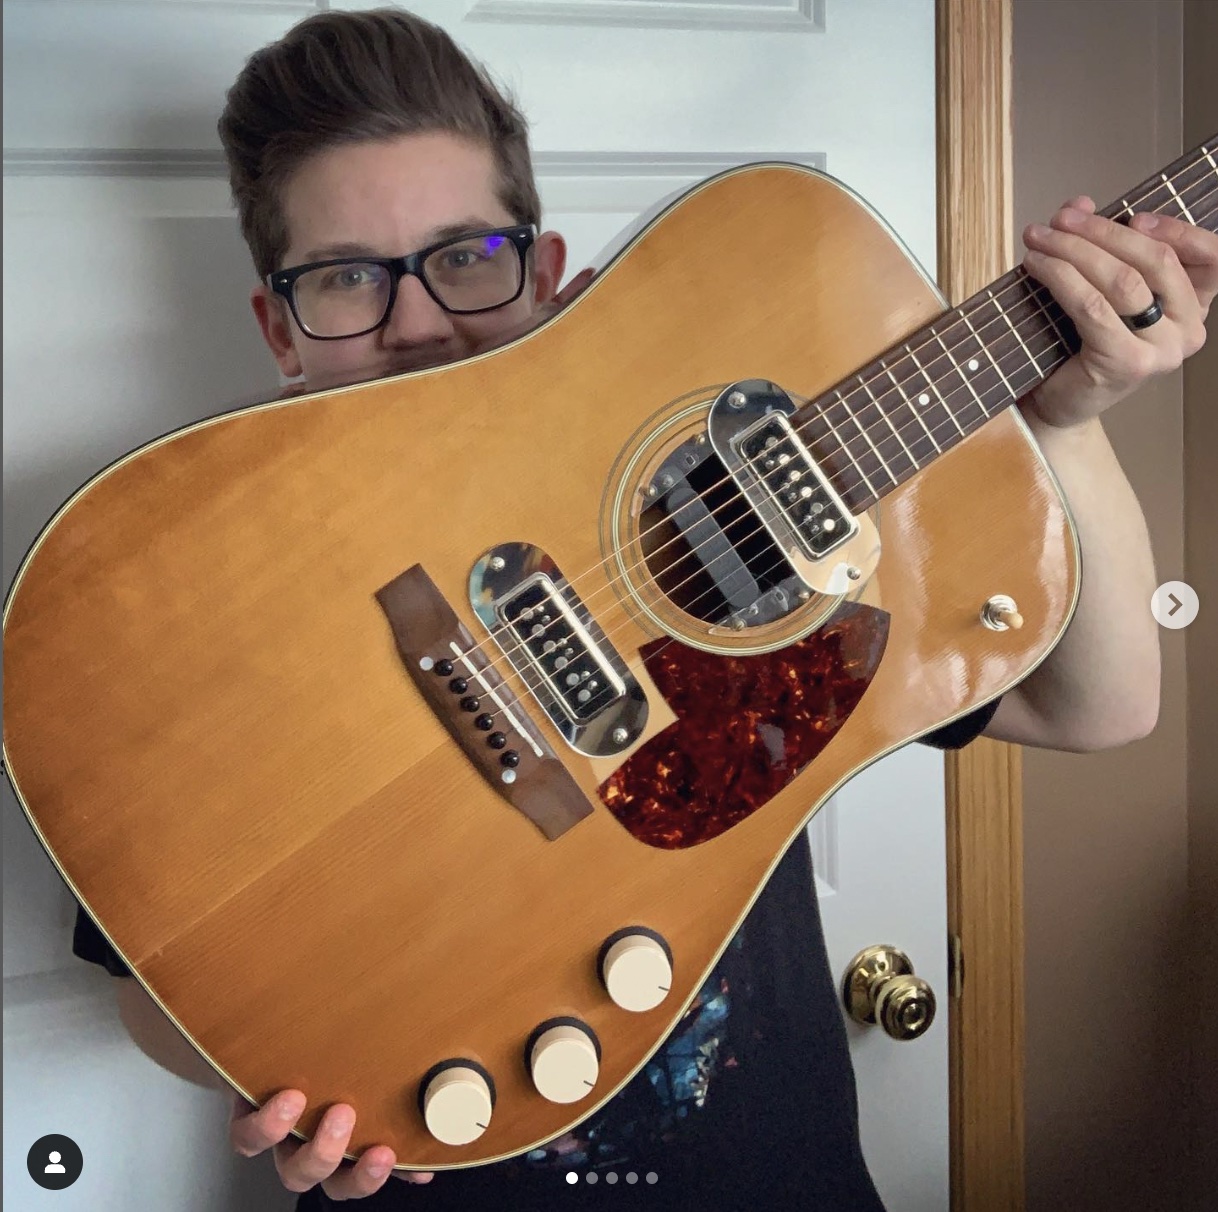 Eric of @nirvanaguitars holding up his remake of Kurt Cobain's guitar from the MTV Unplugged performance.